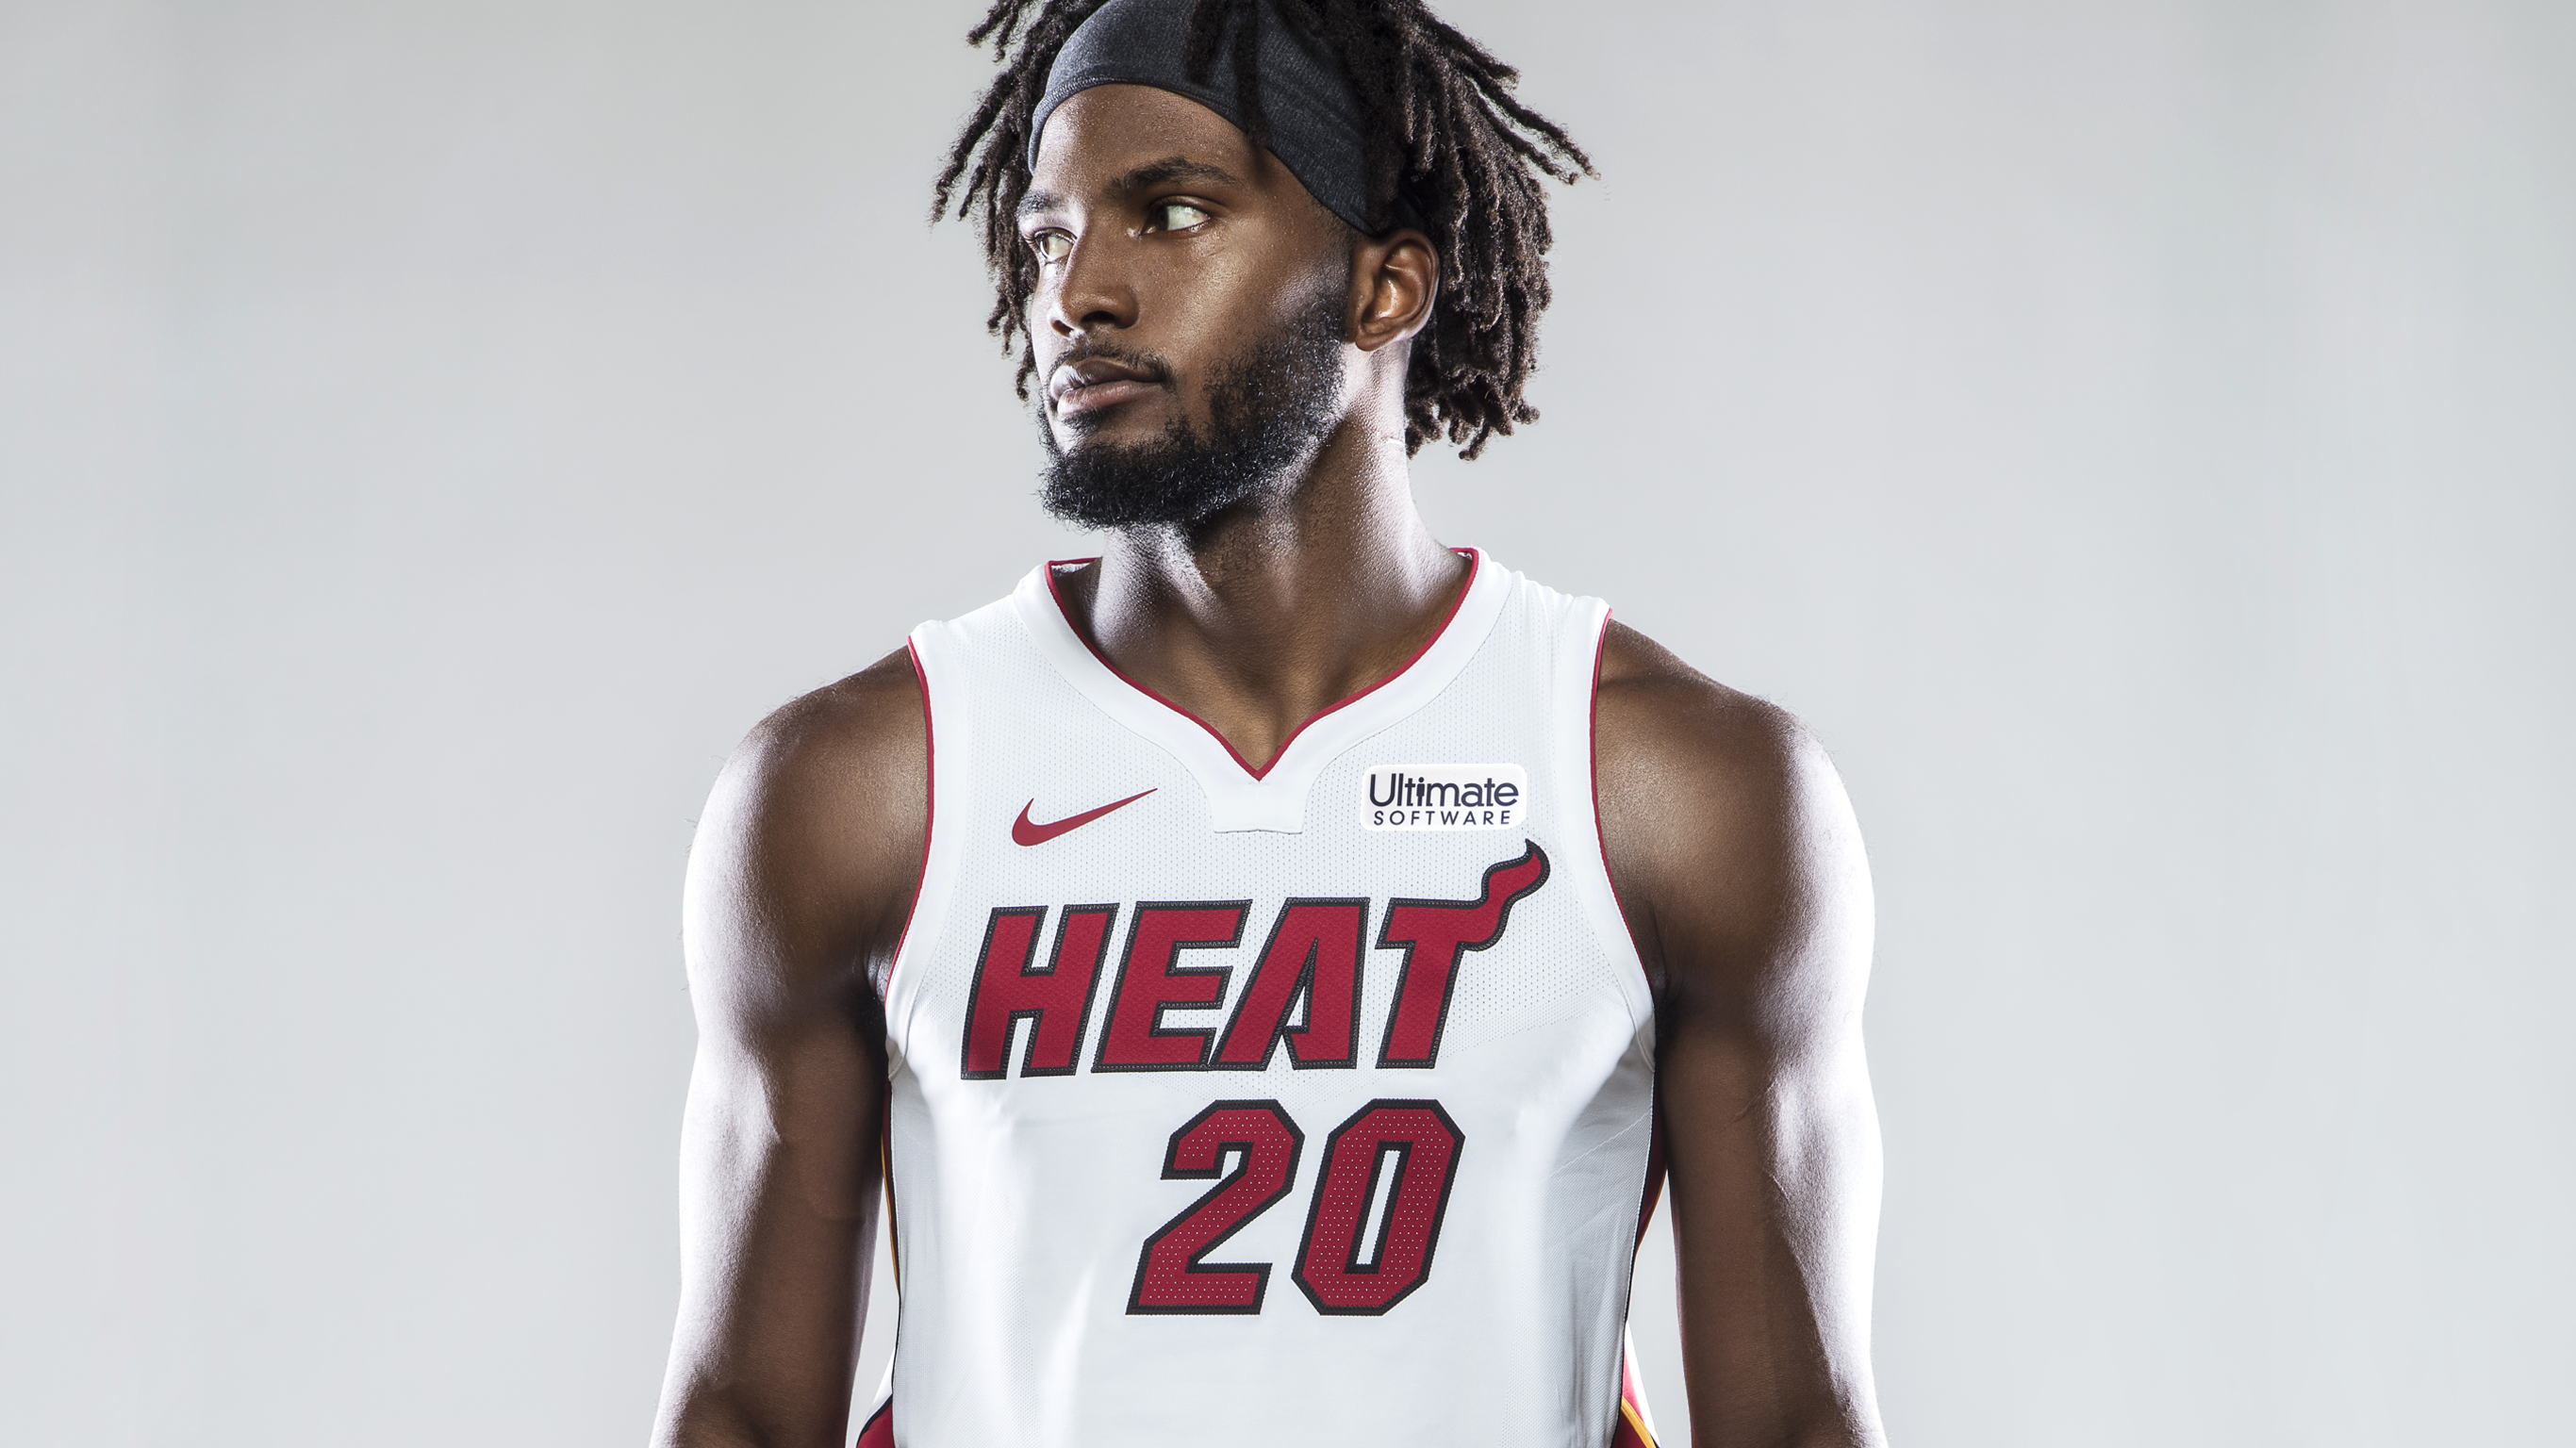 New Miami Heat Jersey with Ultimate Software Logo